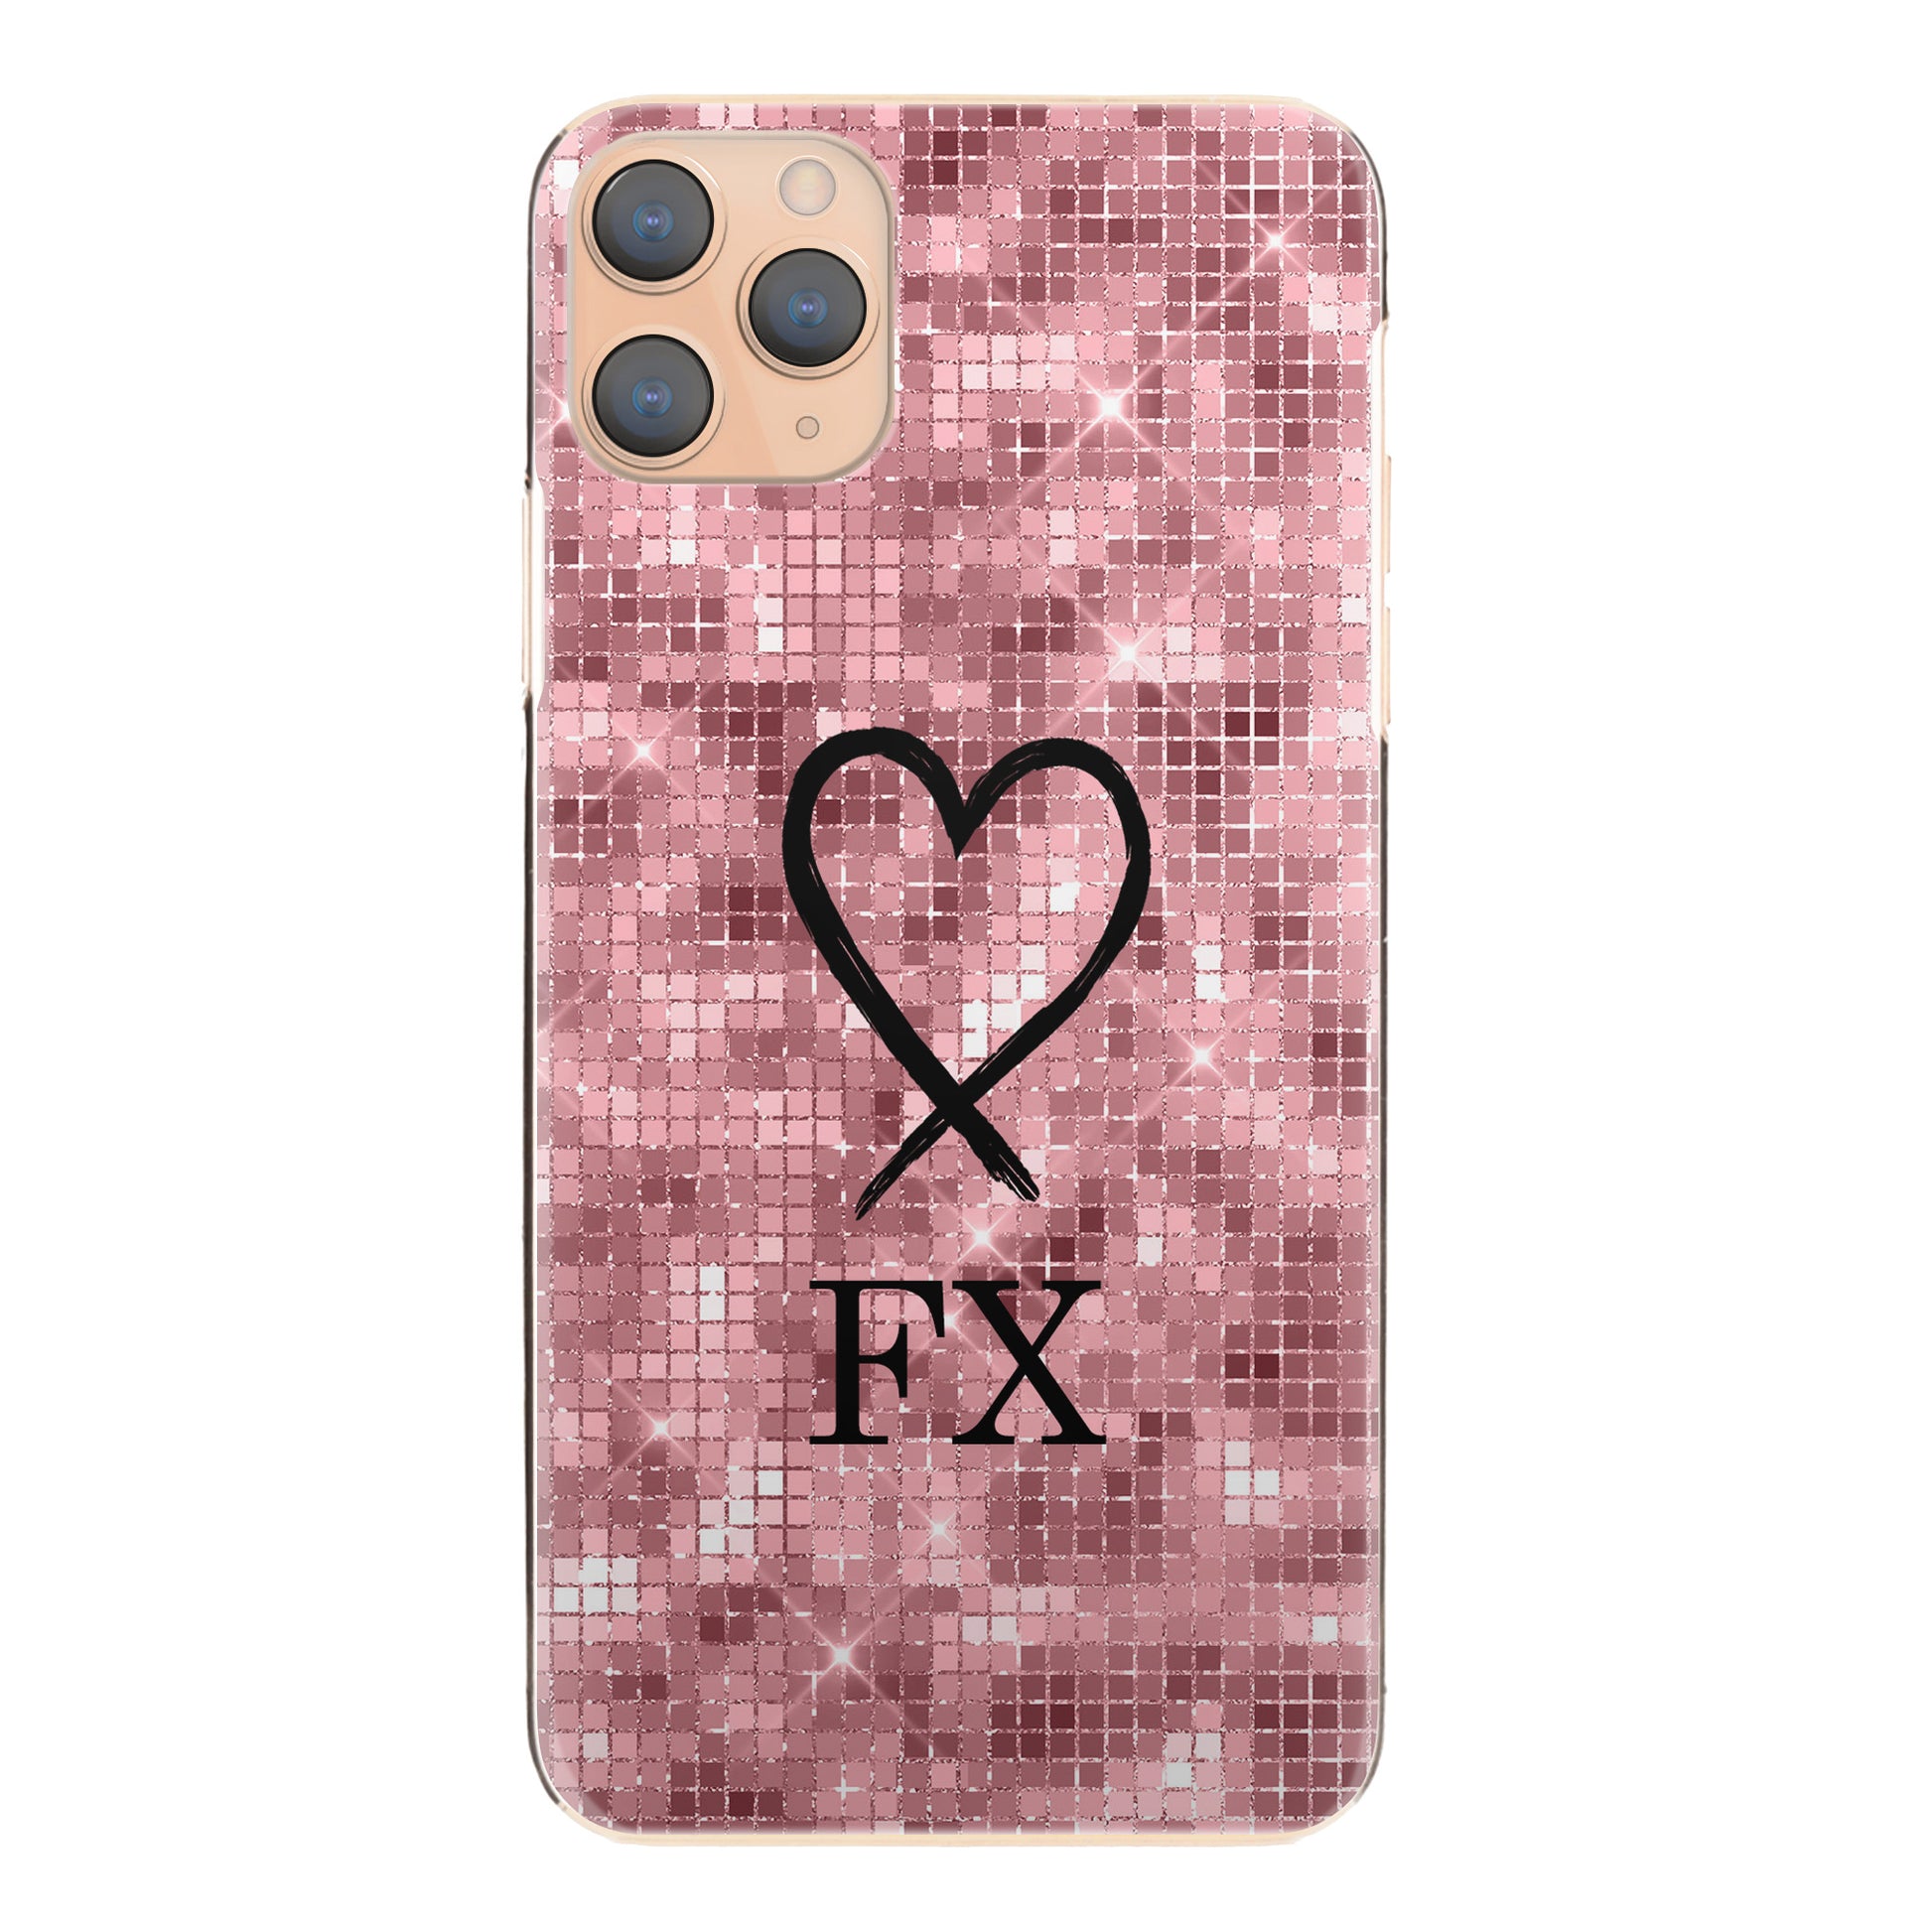 Personalised One Plus Phone Hard Case with Heart Sketch and Initials on Pink Disco Ball